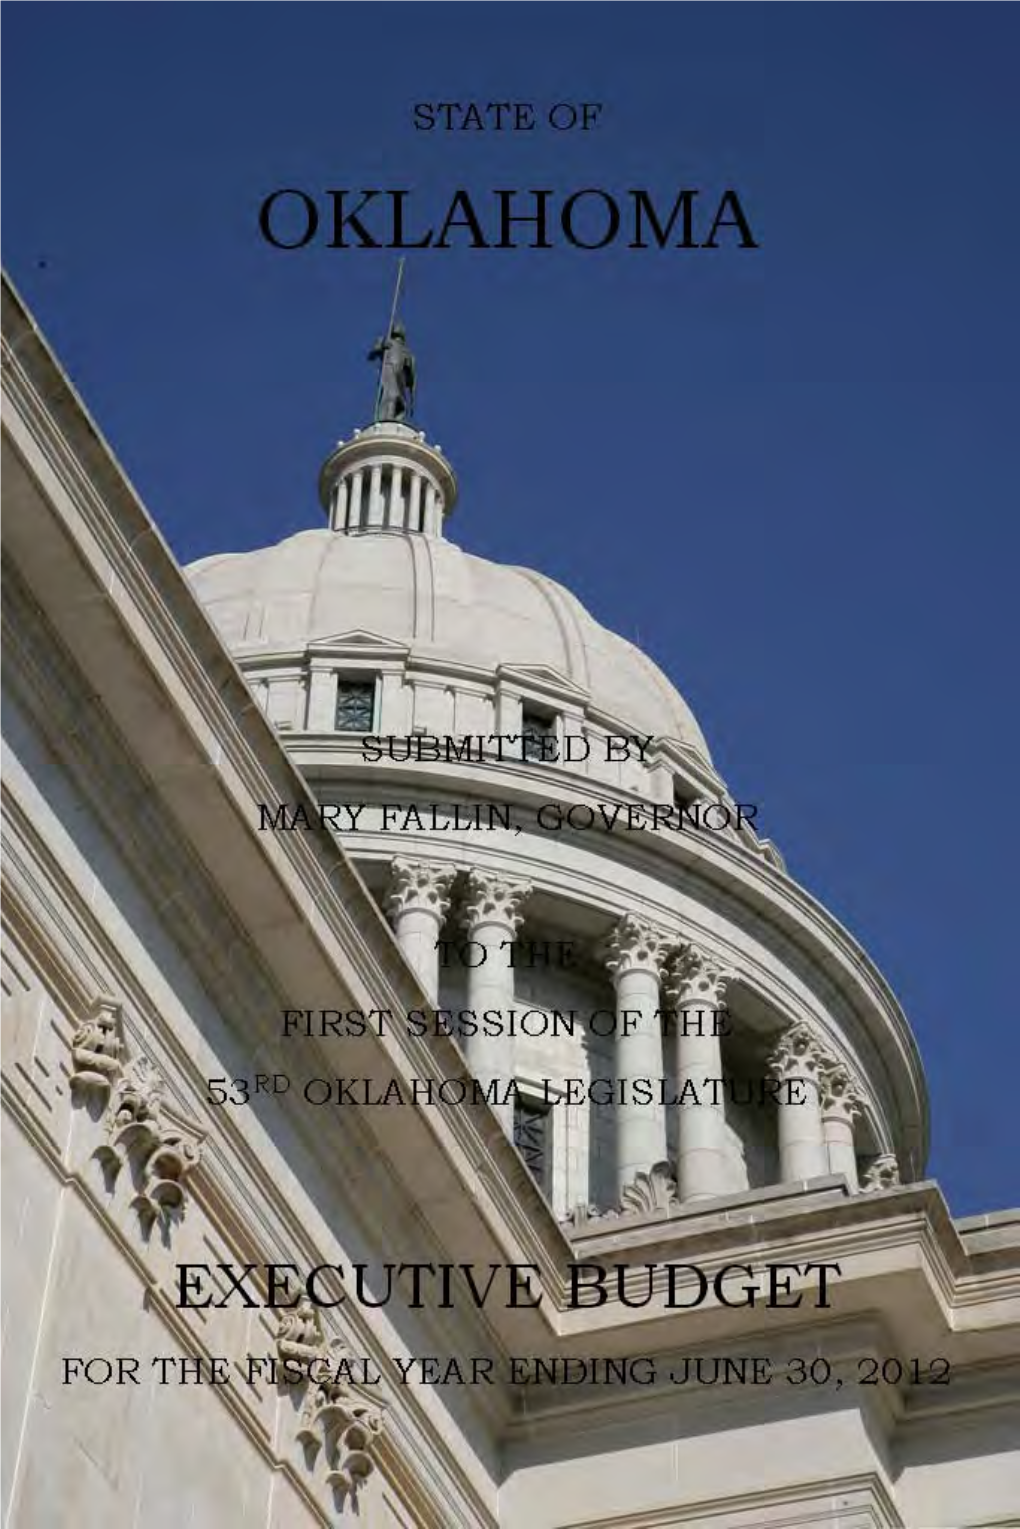 State of Oklahoma Executive Budget for Fiscal Year 2012